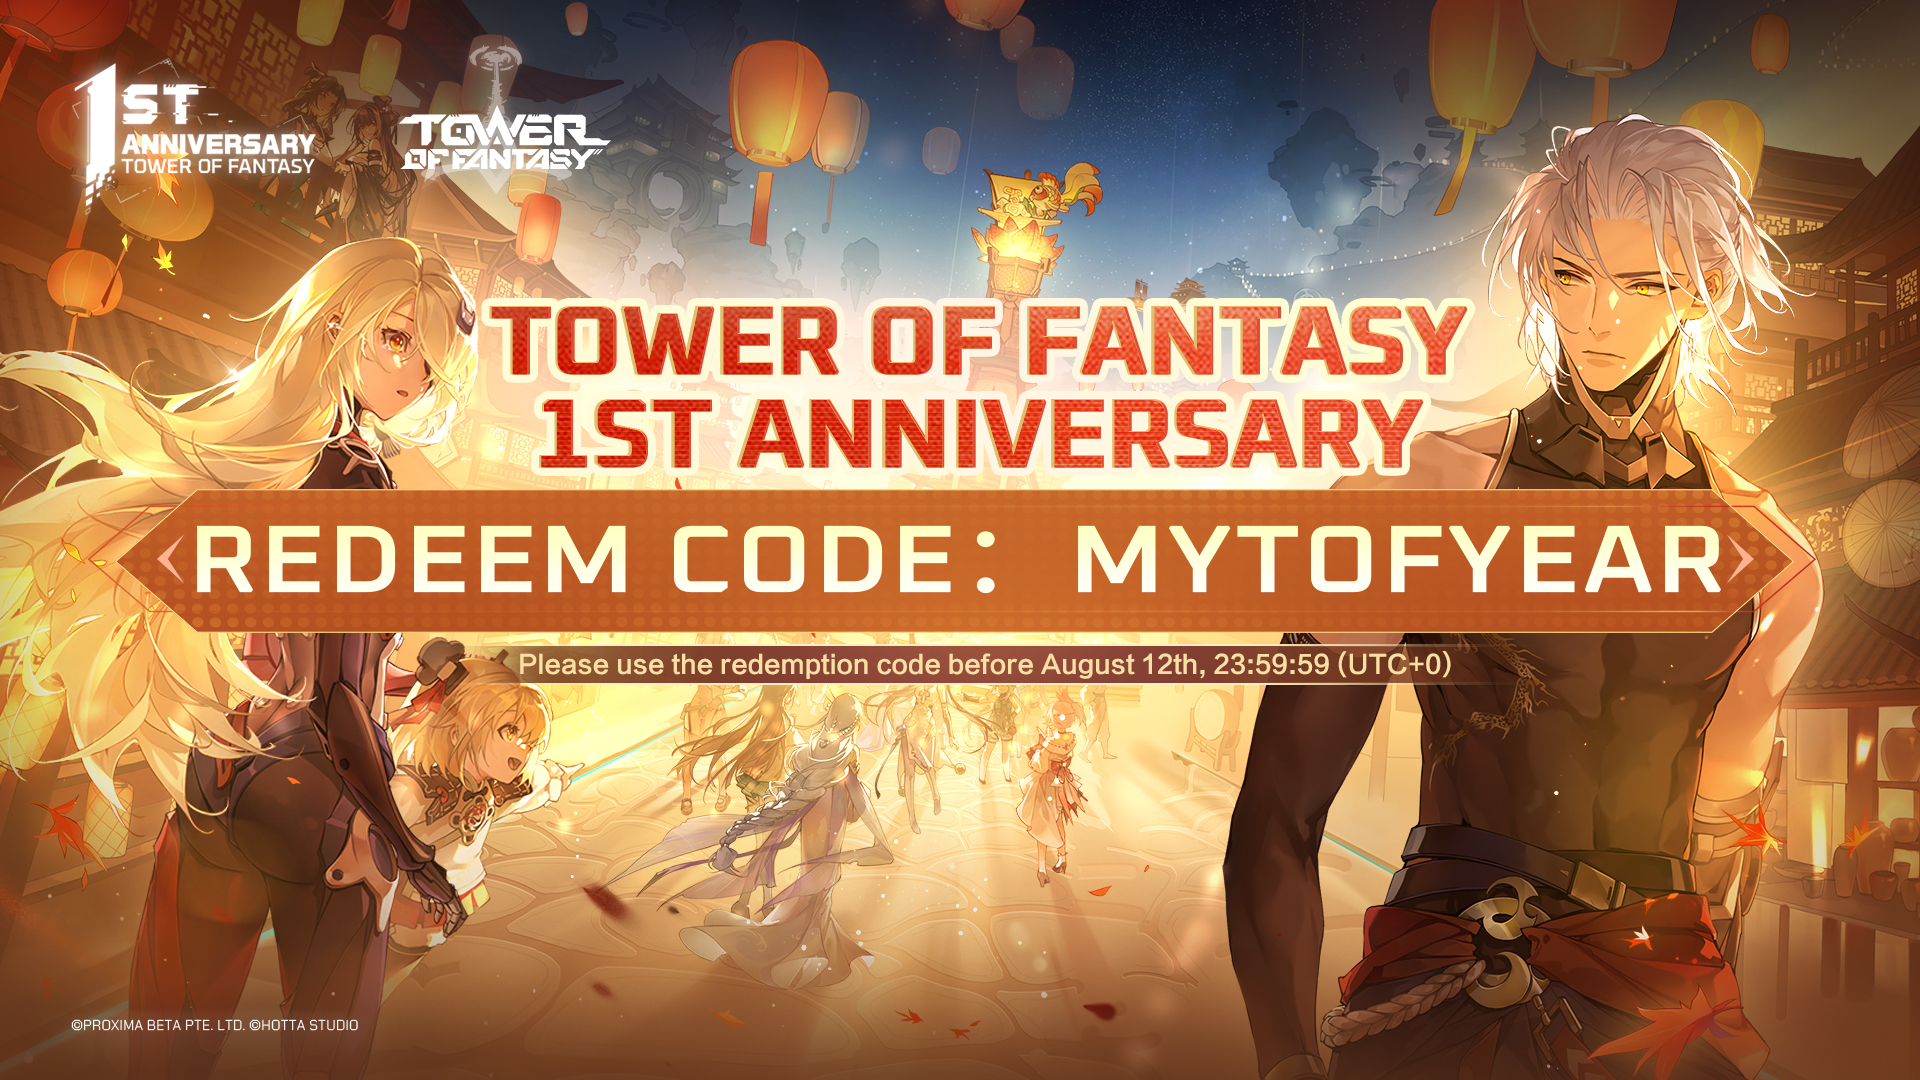 Where to Redeem Codes in Tower of Fantasy 